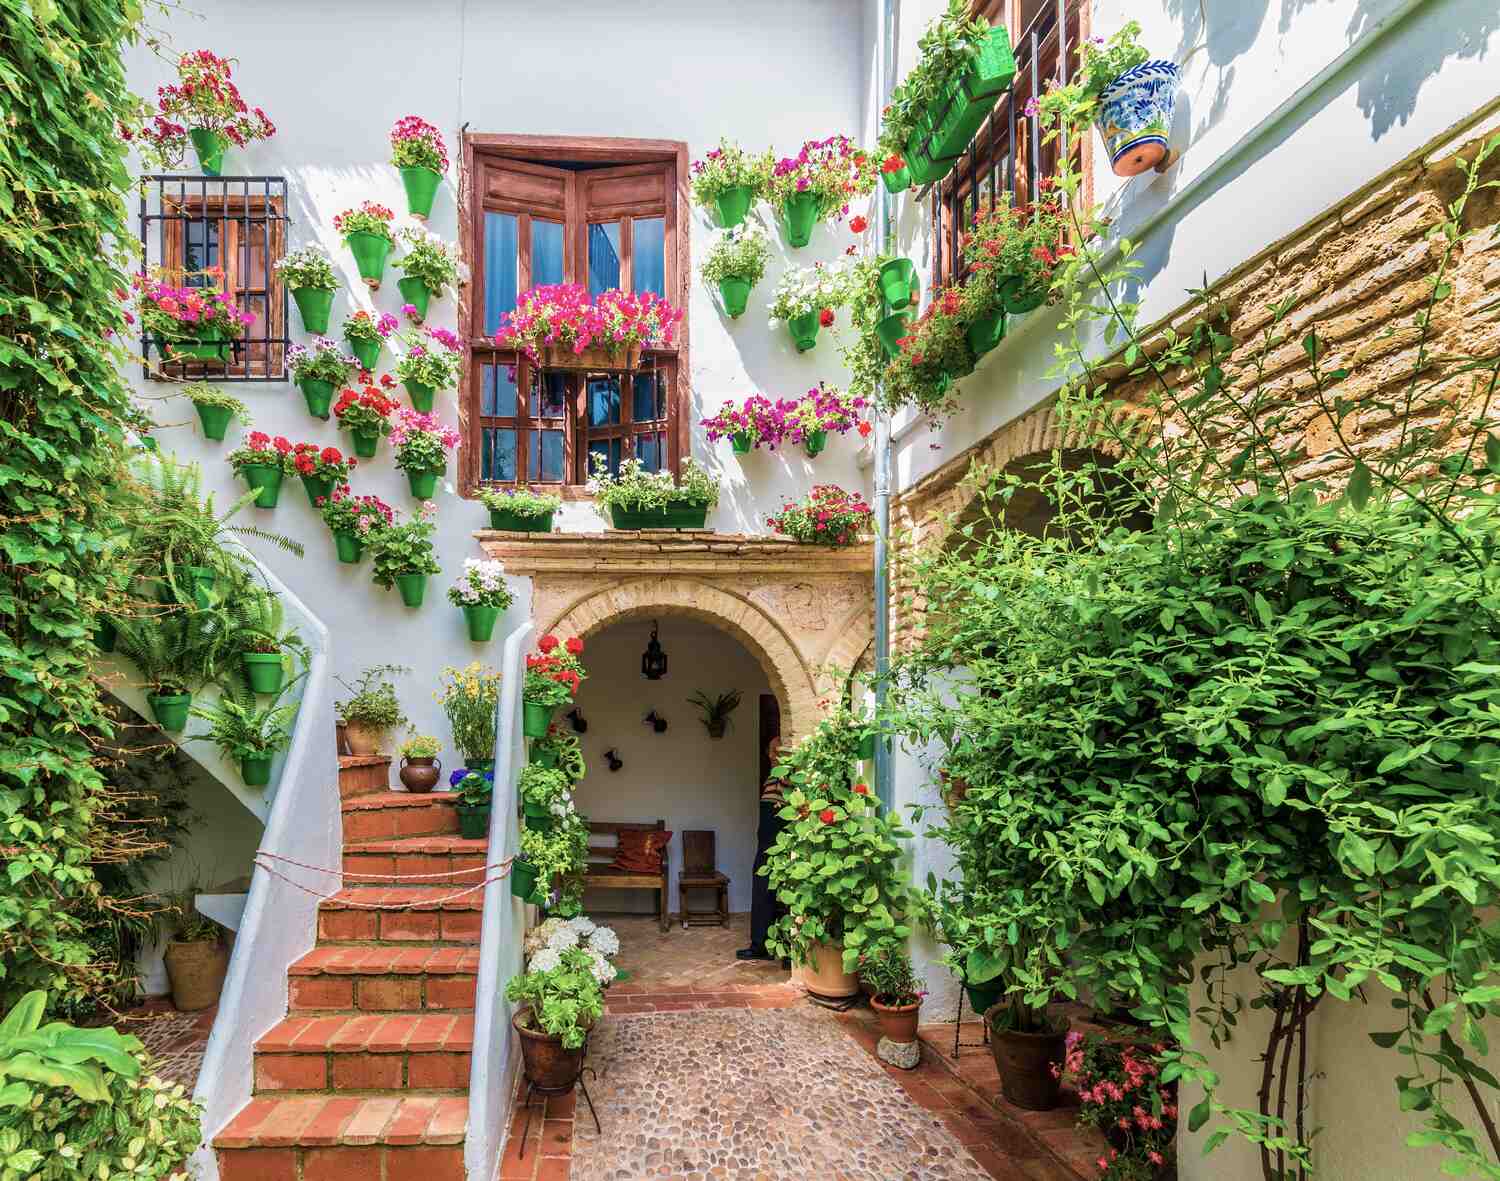 Alleys in Cordoba with flower pots and stairs